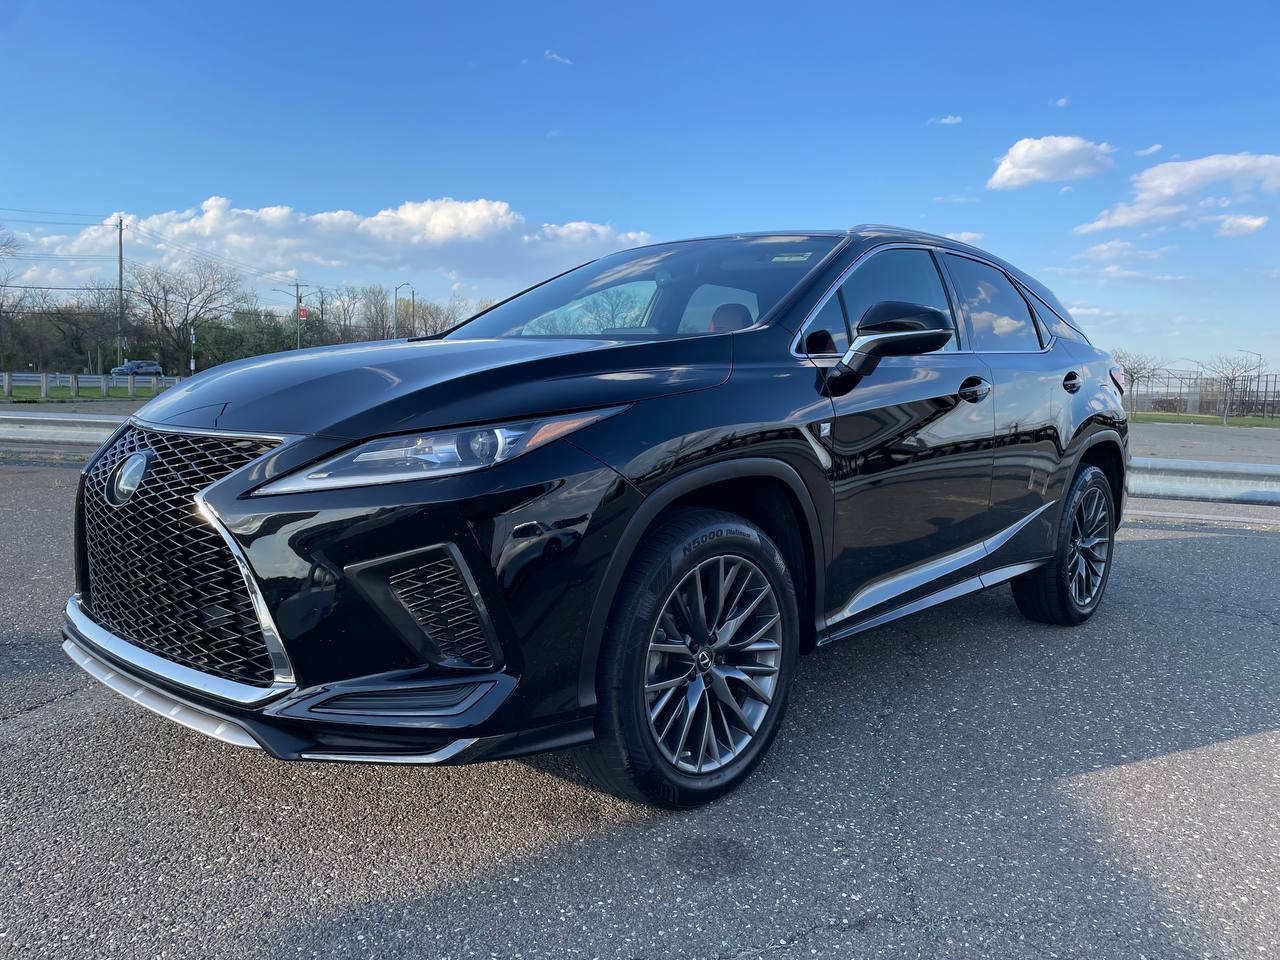 Used - Lexus RX 350 F SPORT SUV for sale in Staten Island NY